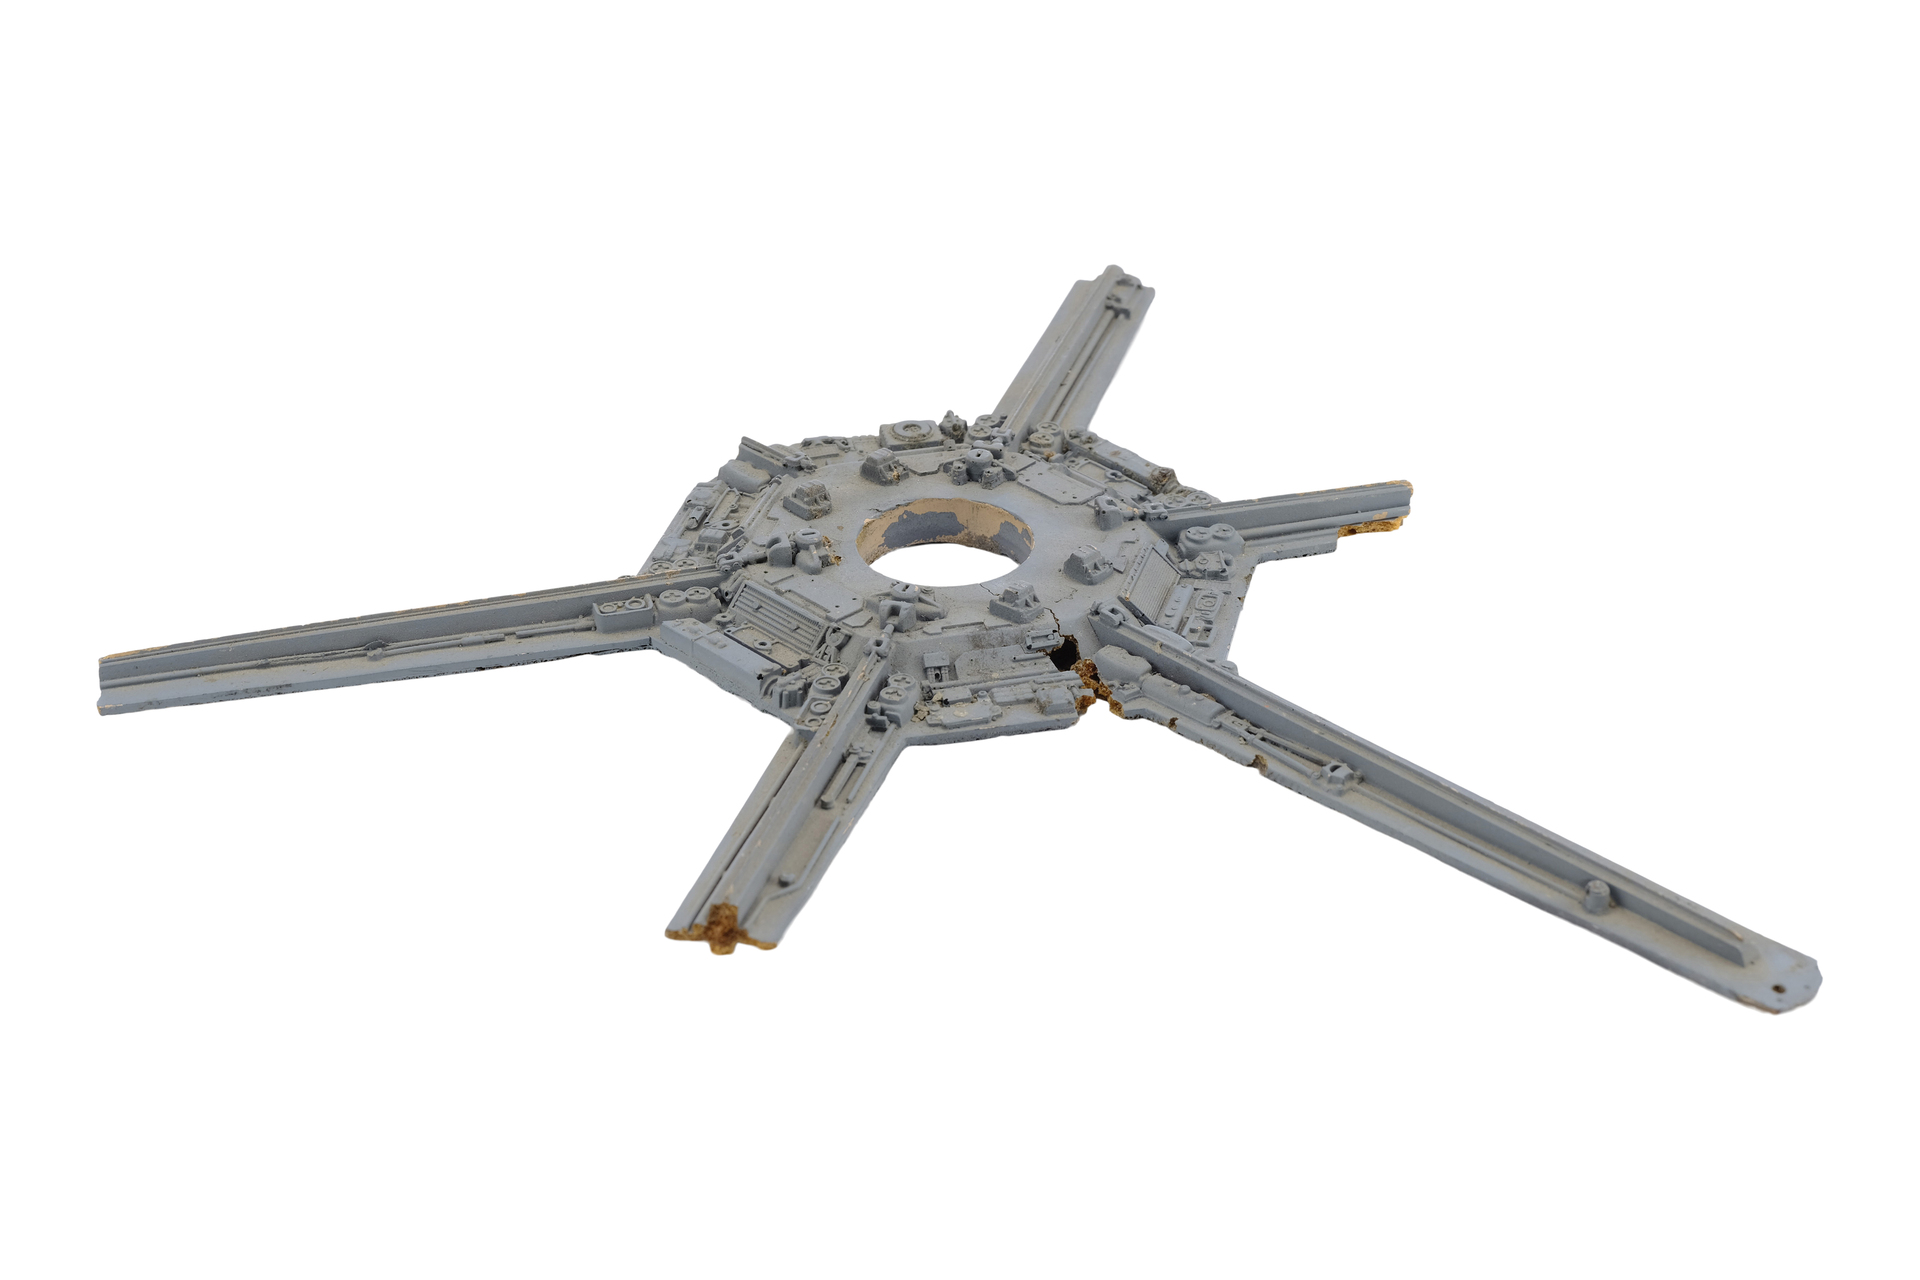 STAR WARS: A NEW HOPE (1977) - Exploded Pyrotechnic TIE Fighter Wing Structure Component - Image 3 of 7